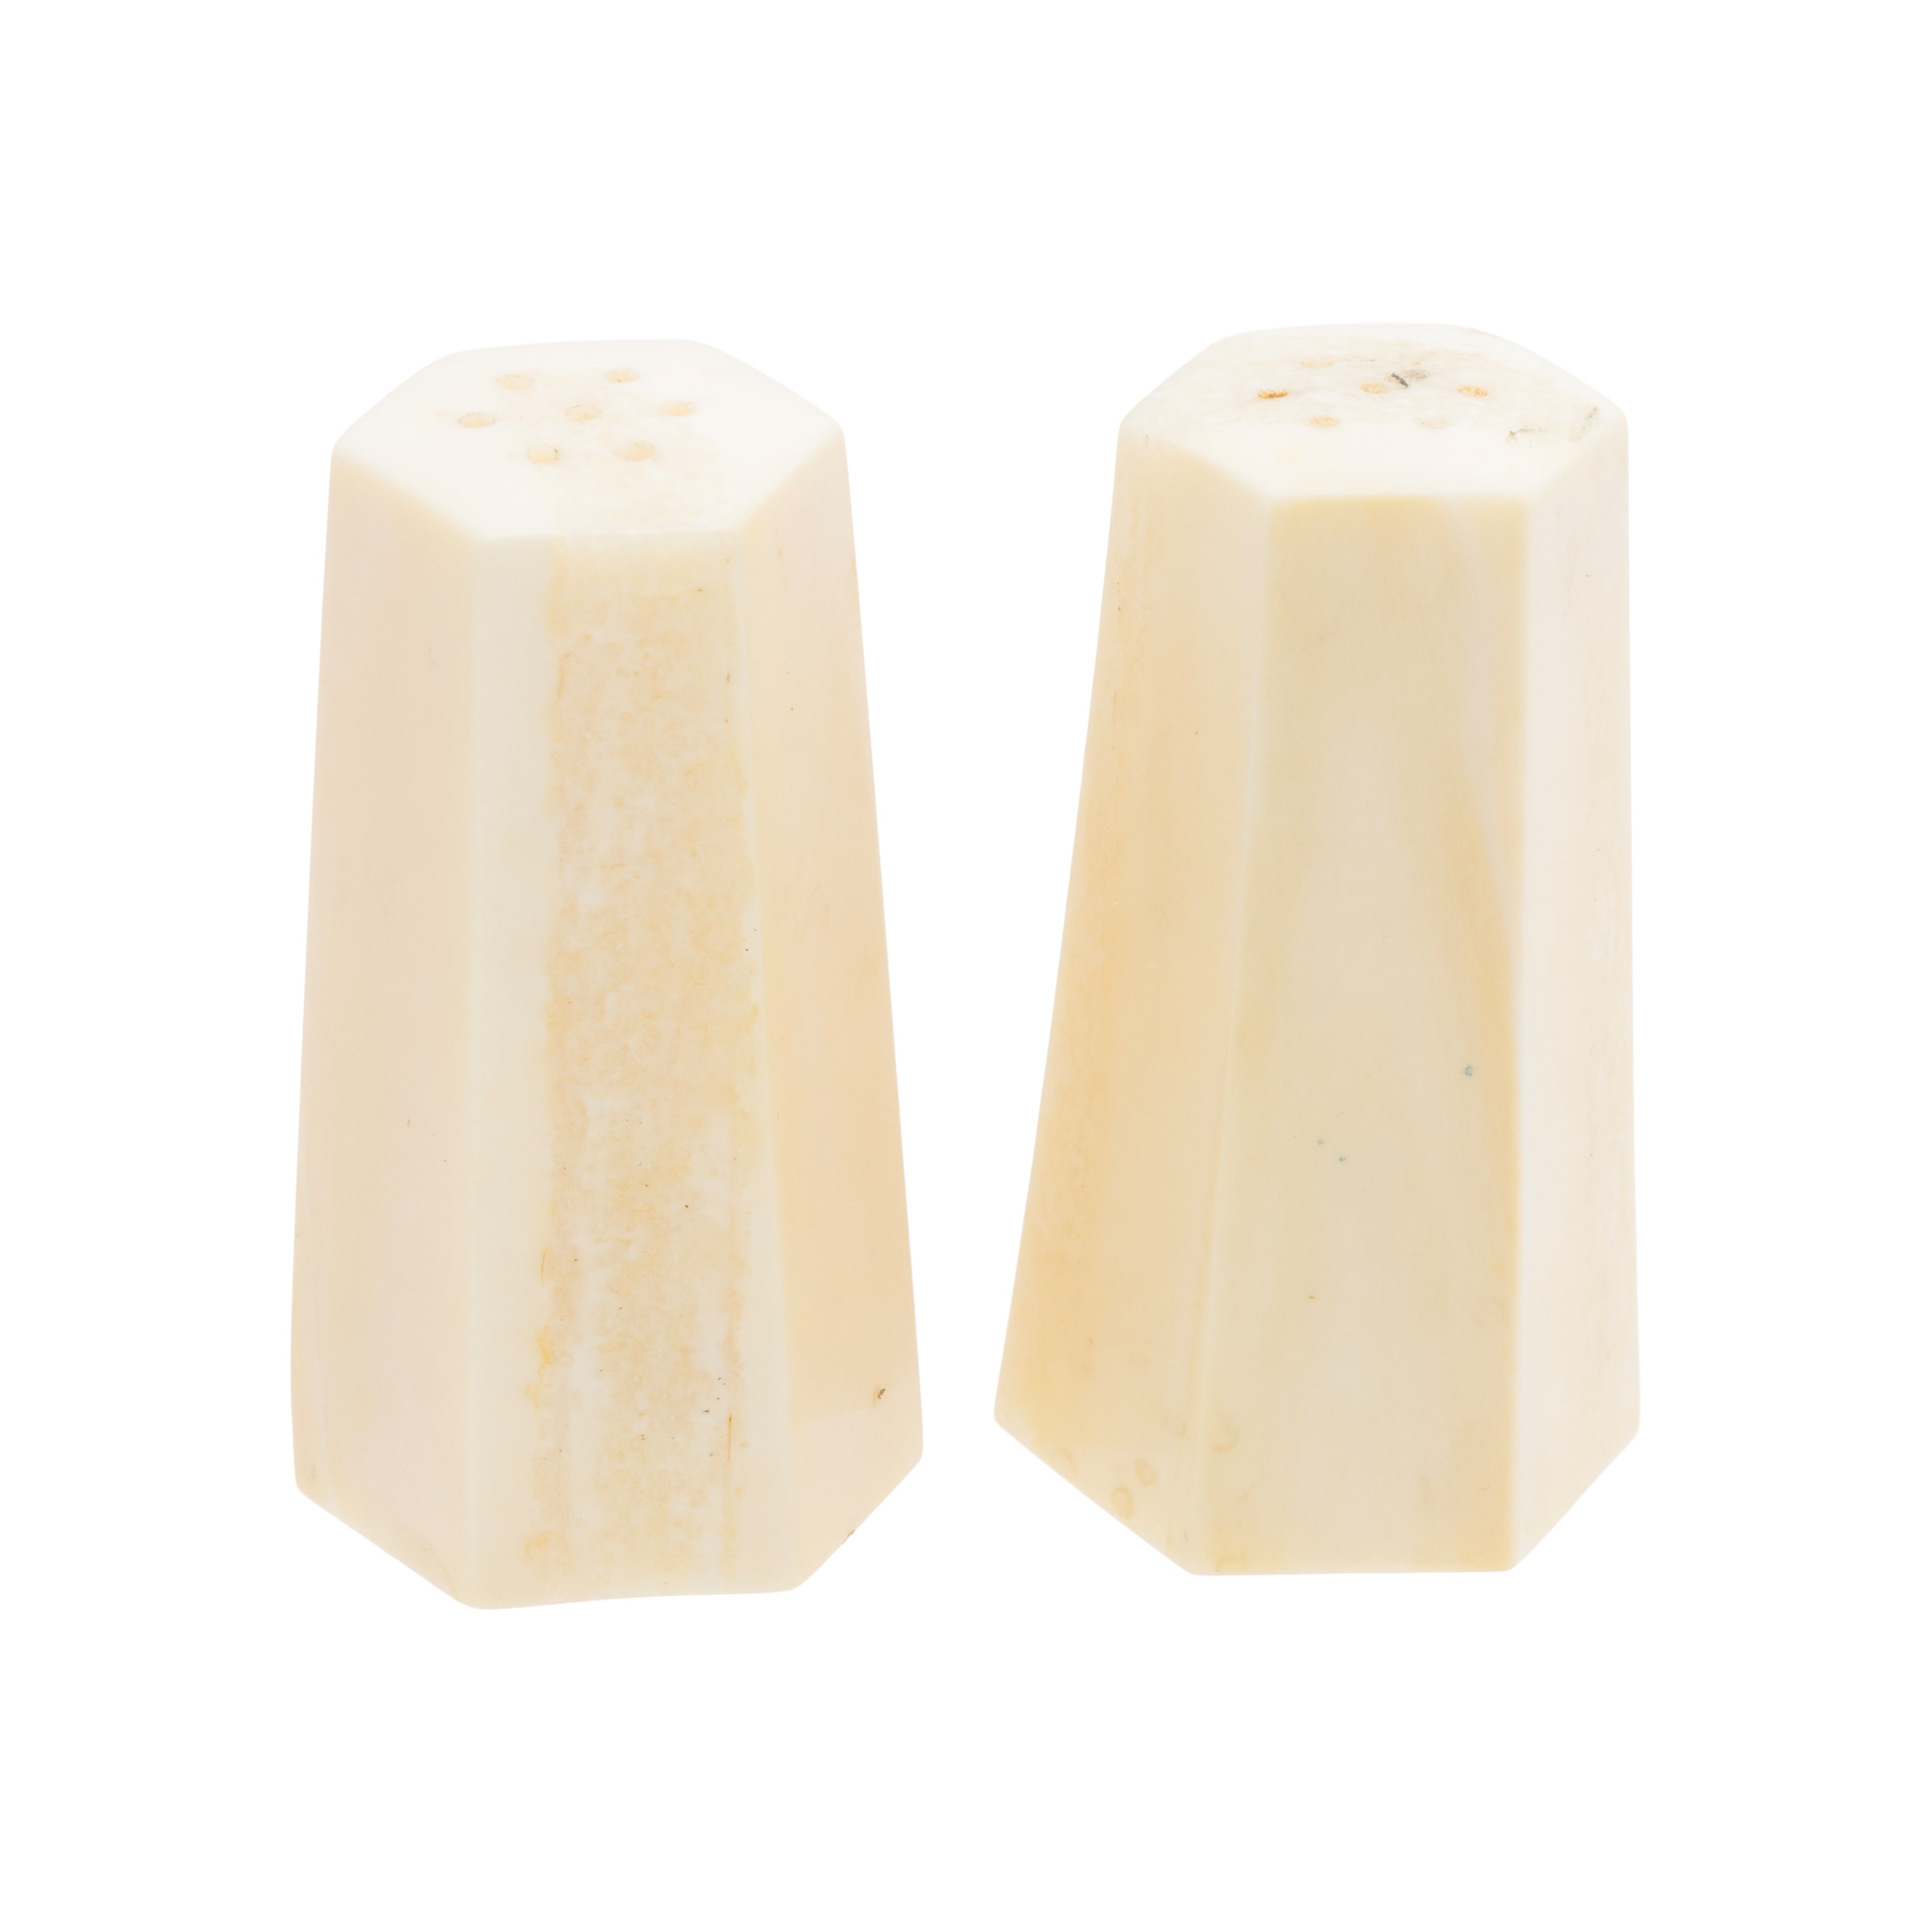 Inuit Ivory Totem Salt and Pepper Shakers